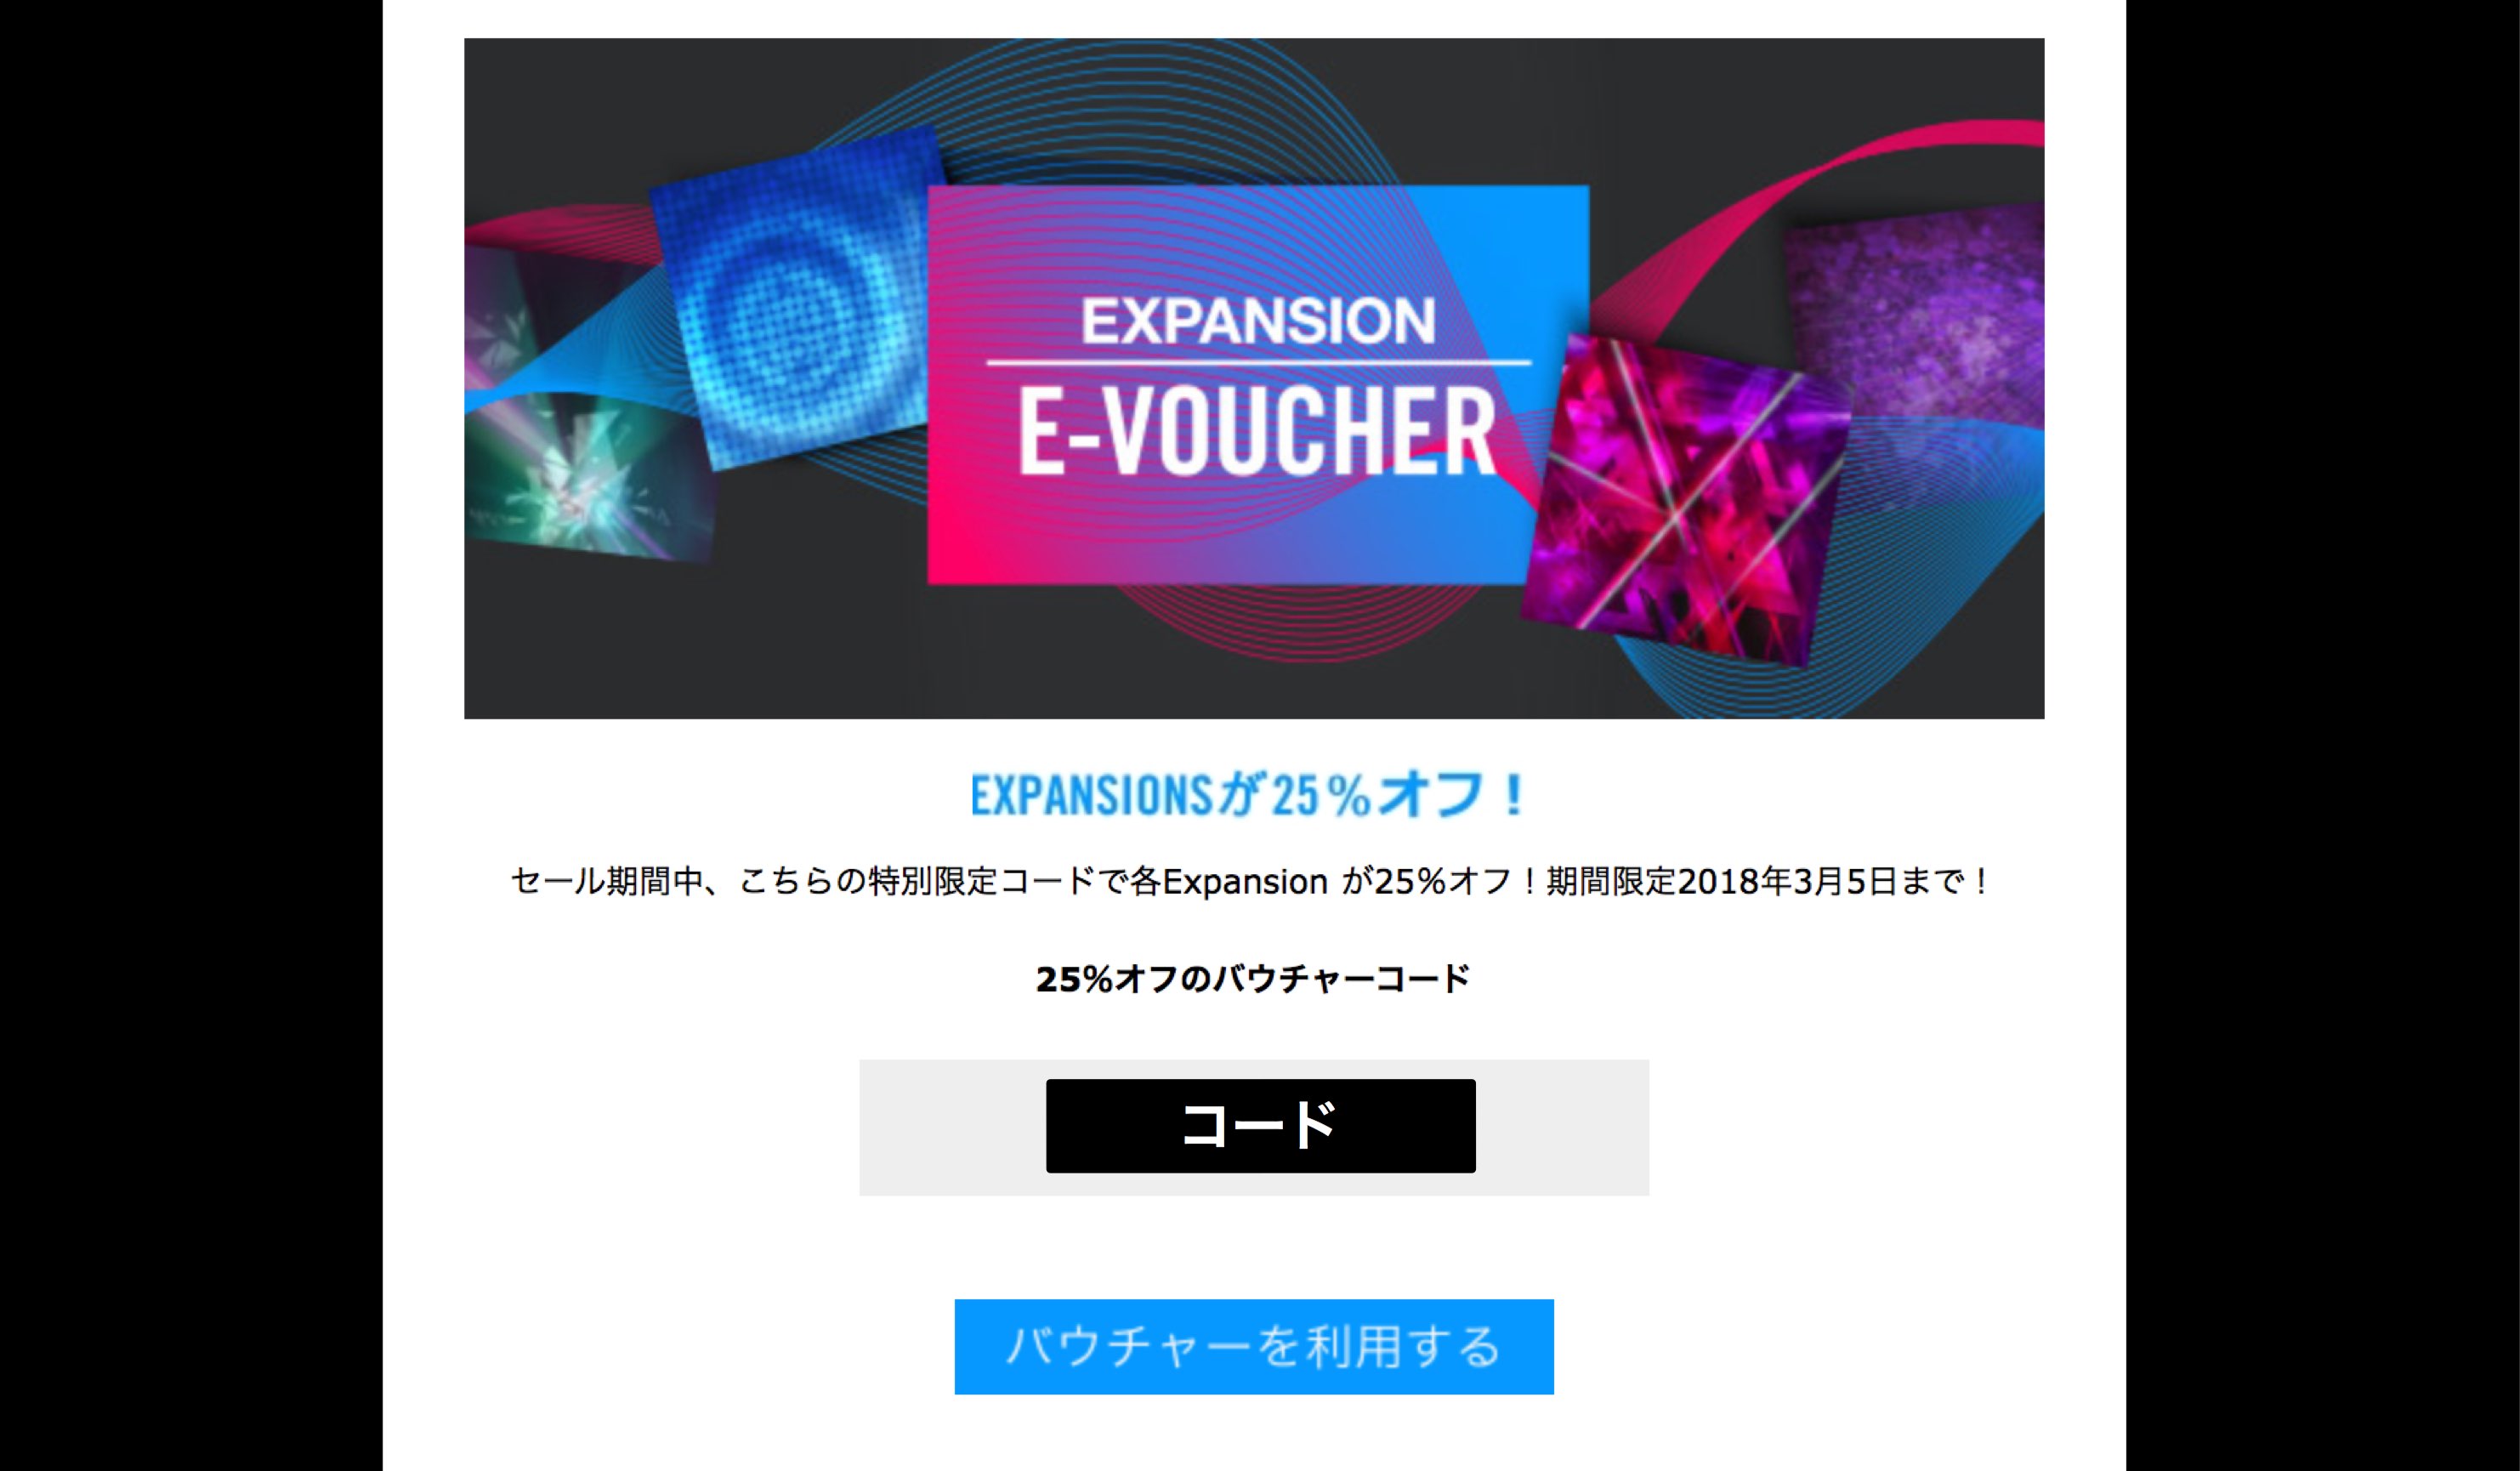 Expansions